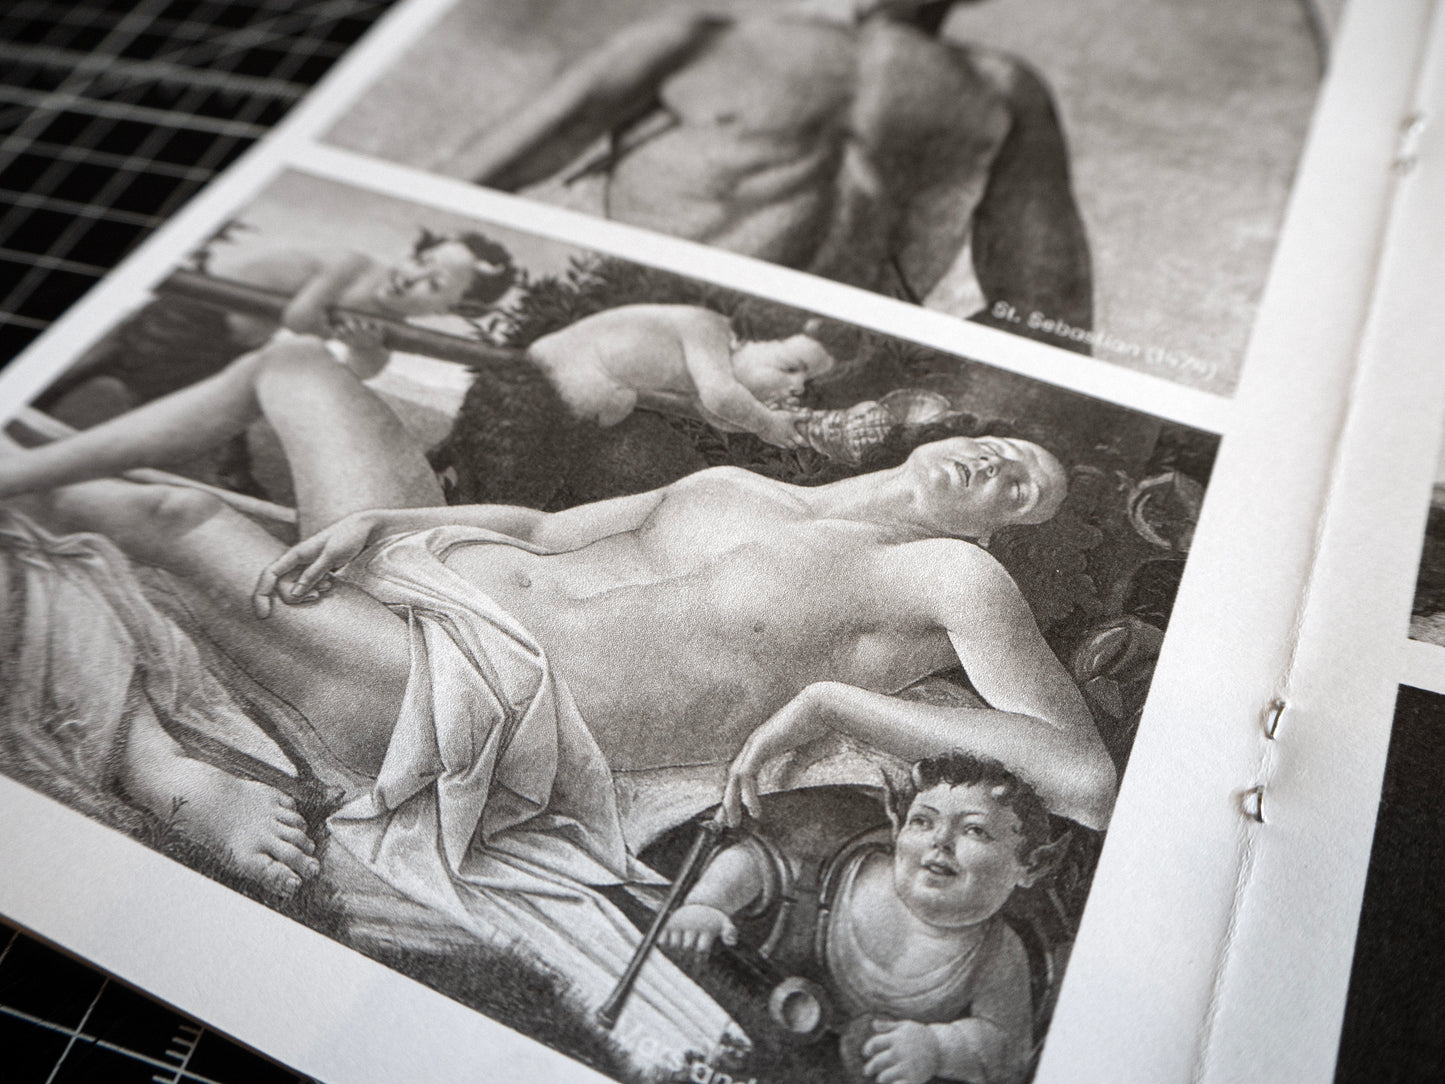 Grayscale Zine of Sultry Sodomites